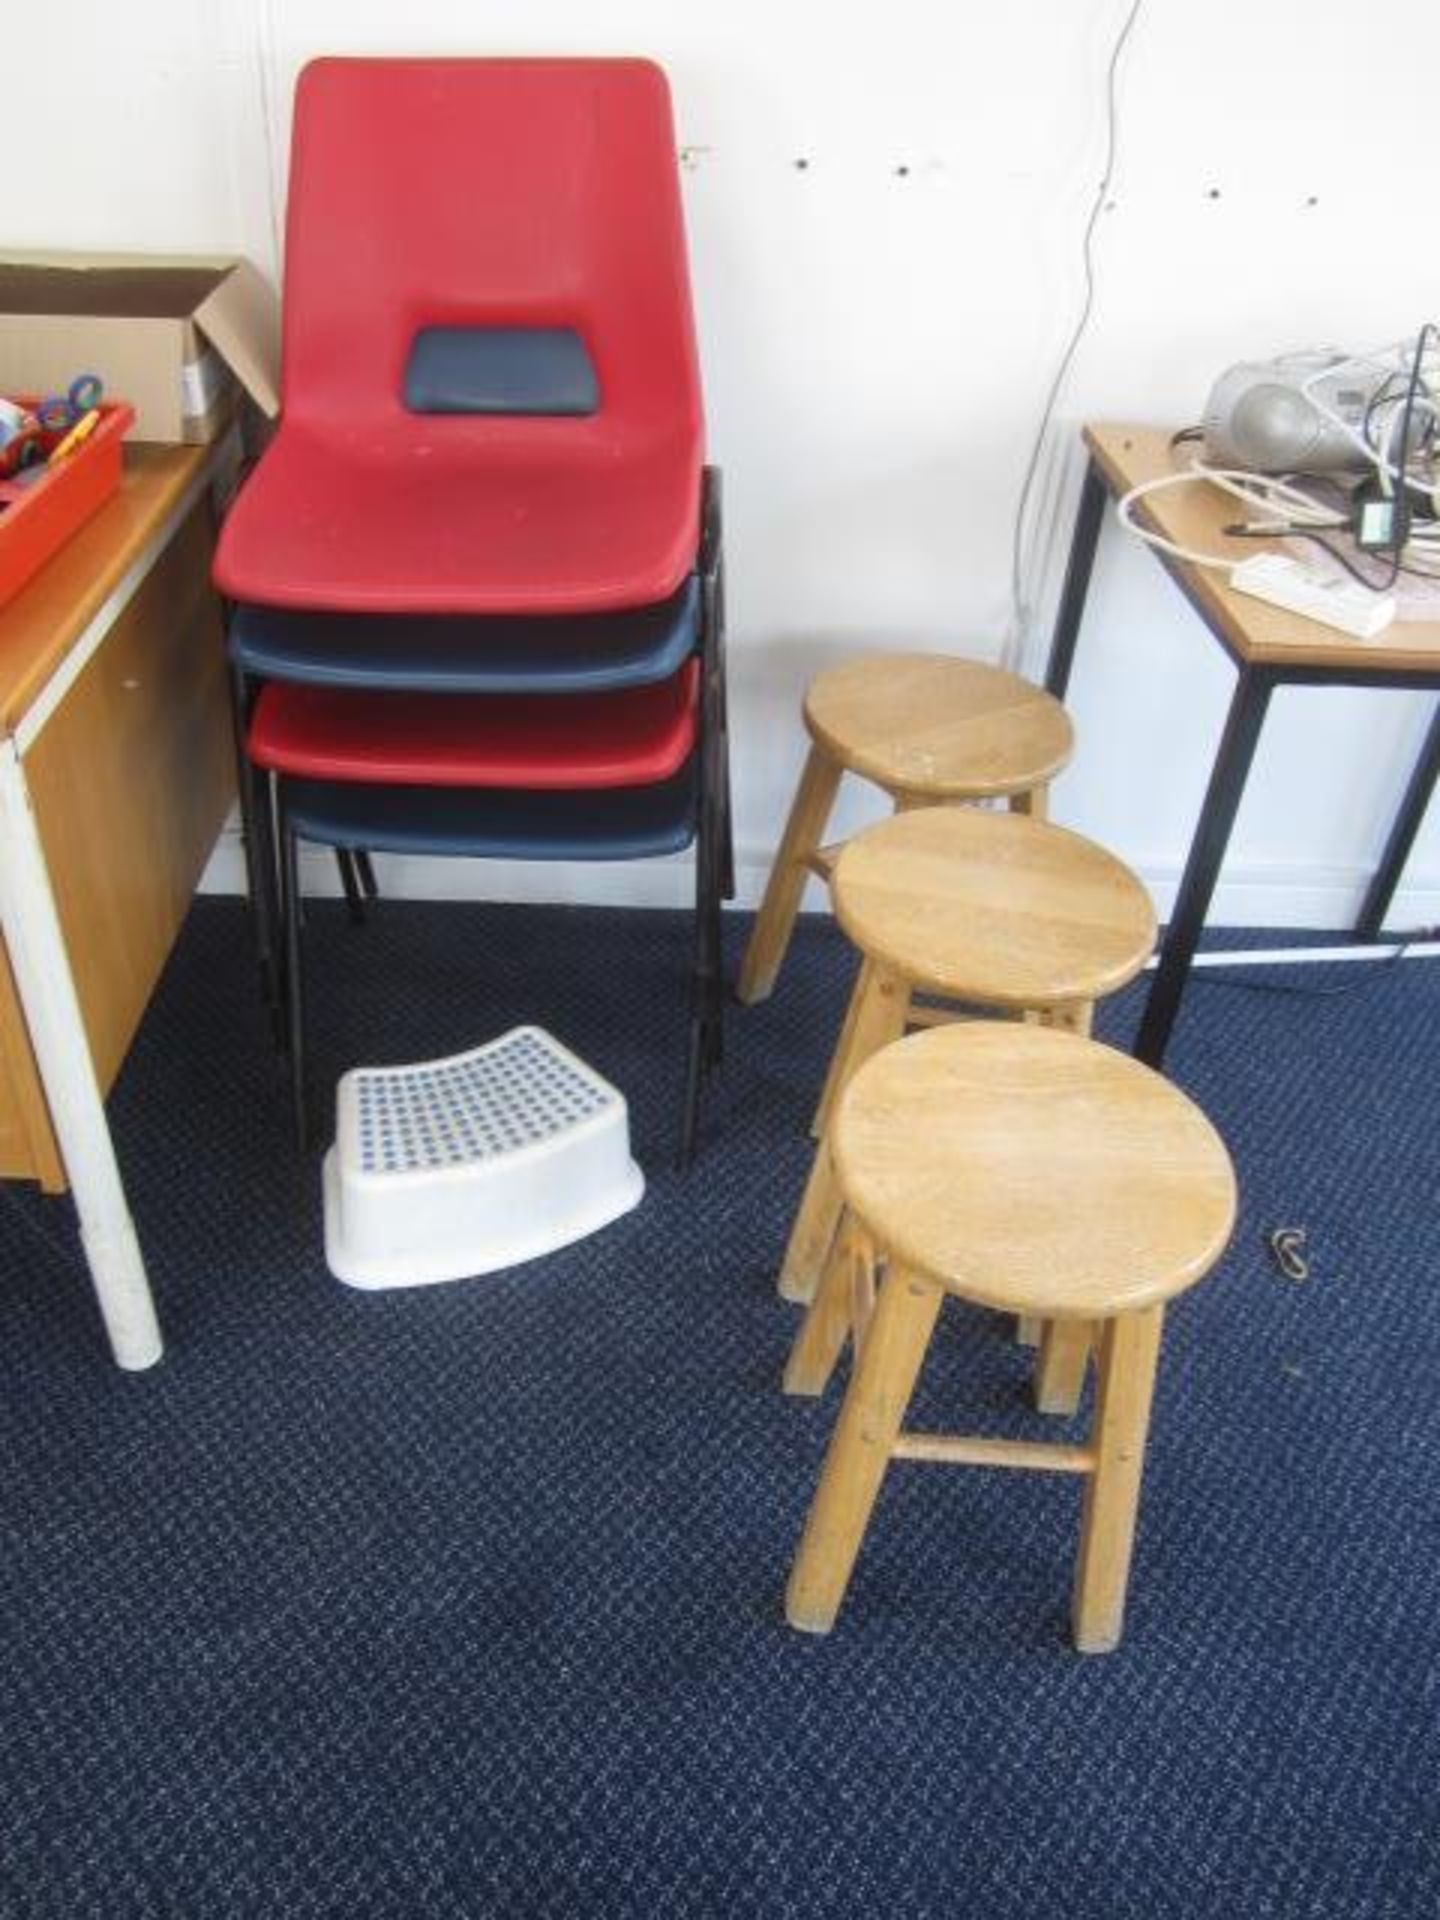 Single pedestal desk, upholstered chair, 4 x plastic stacking chairs, 3 x stools, cassette player, - Image 3 of 4